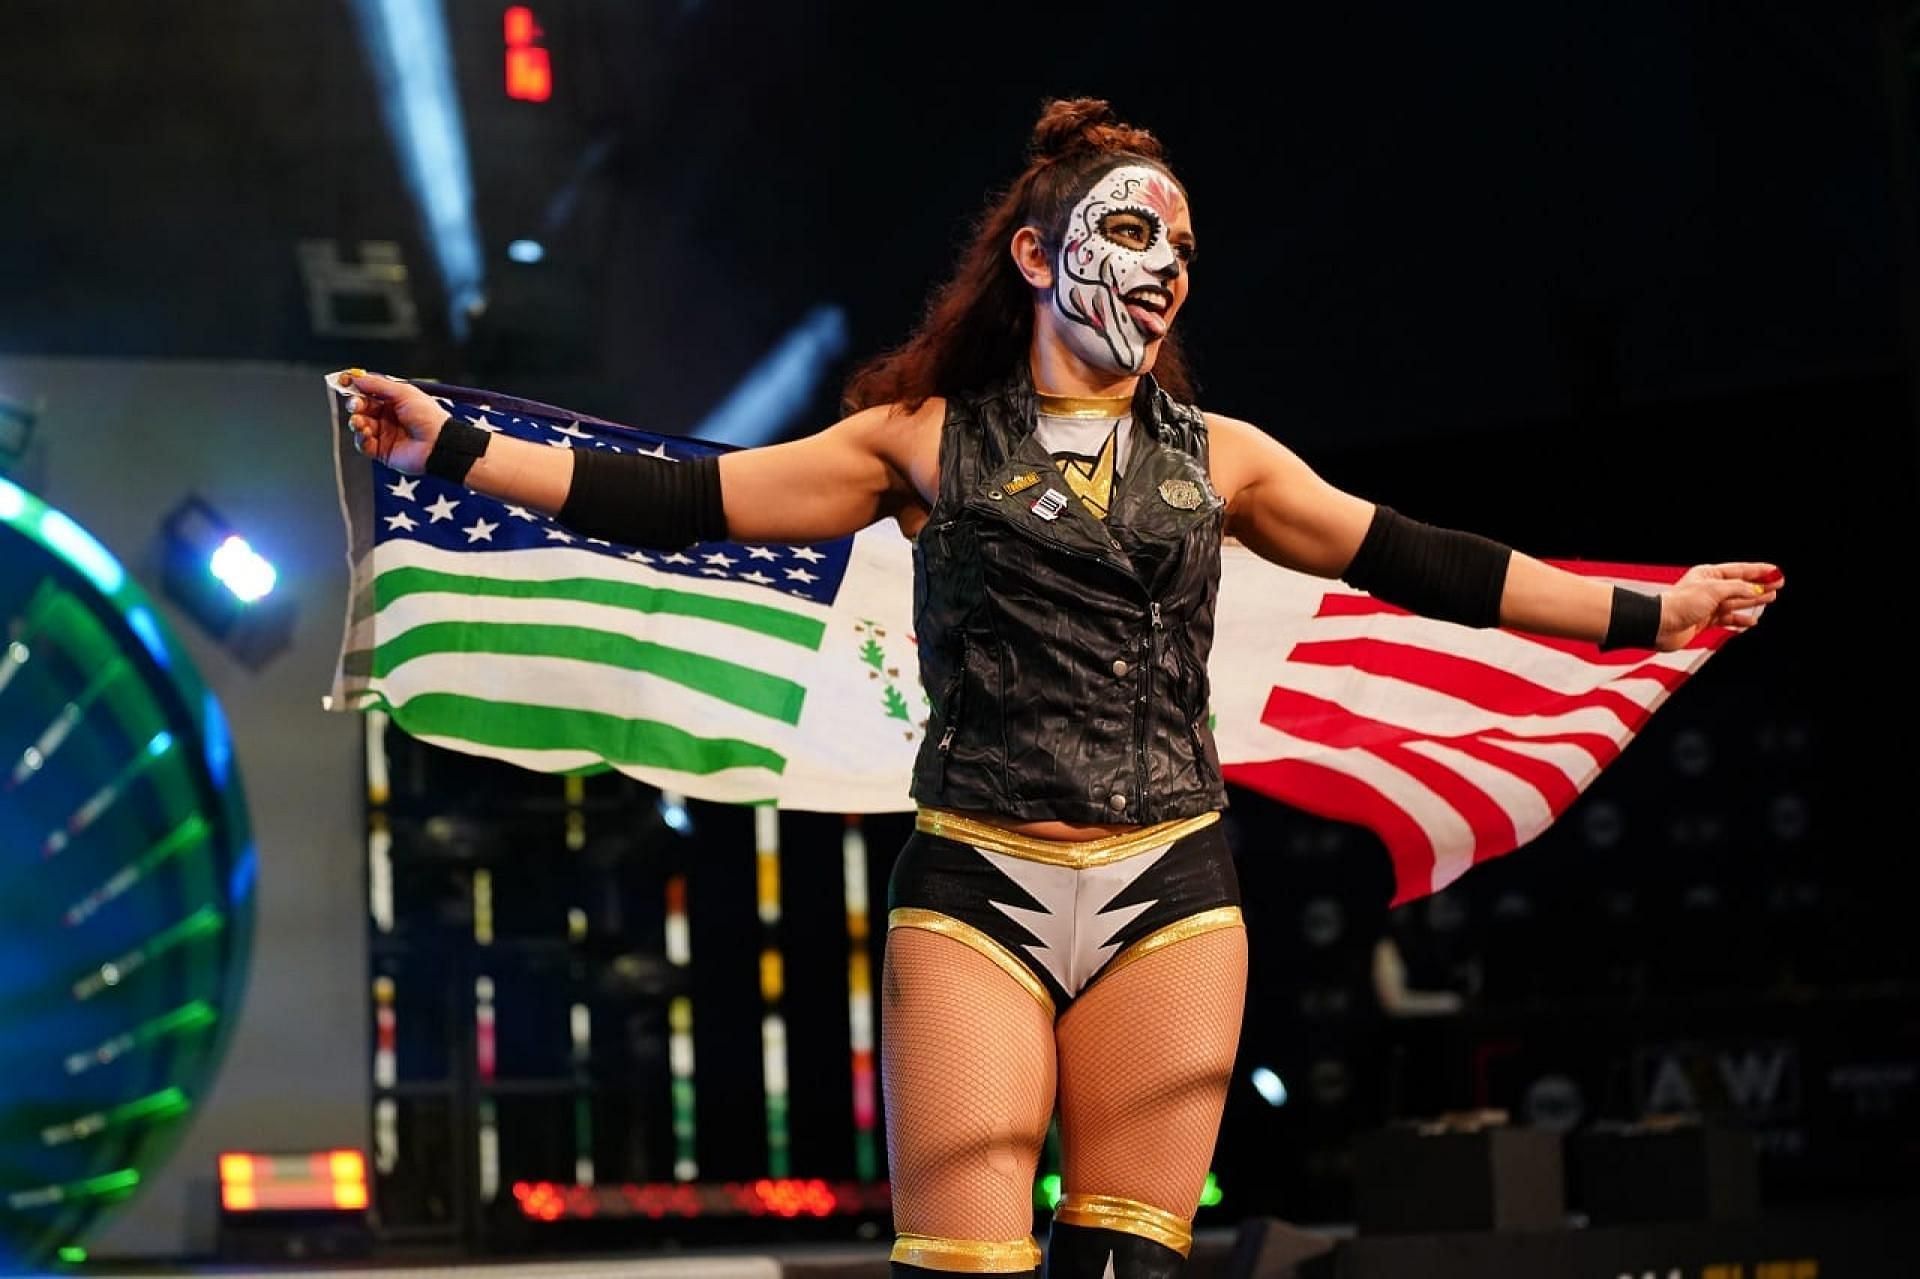 Thunder Rosa joined AEW in 2020